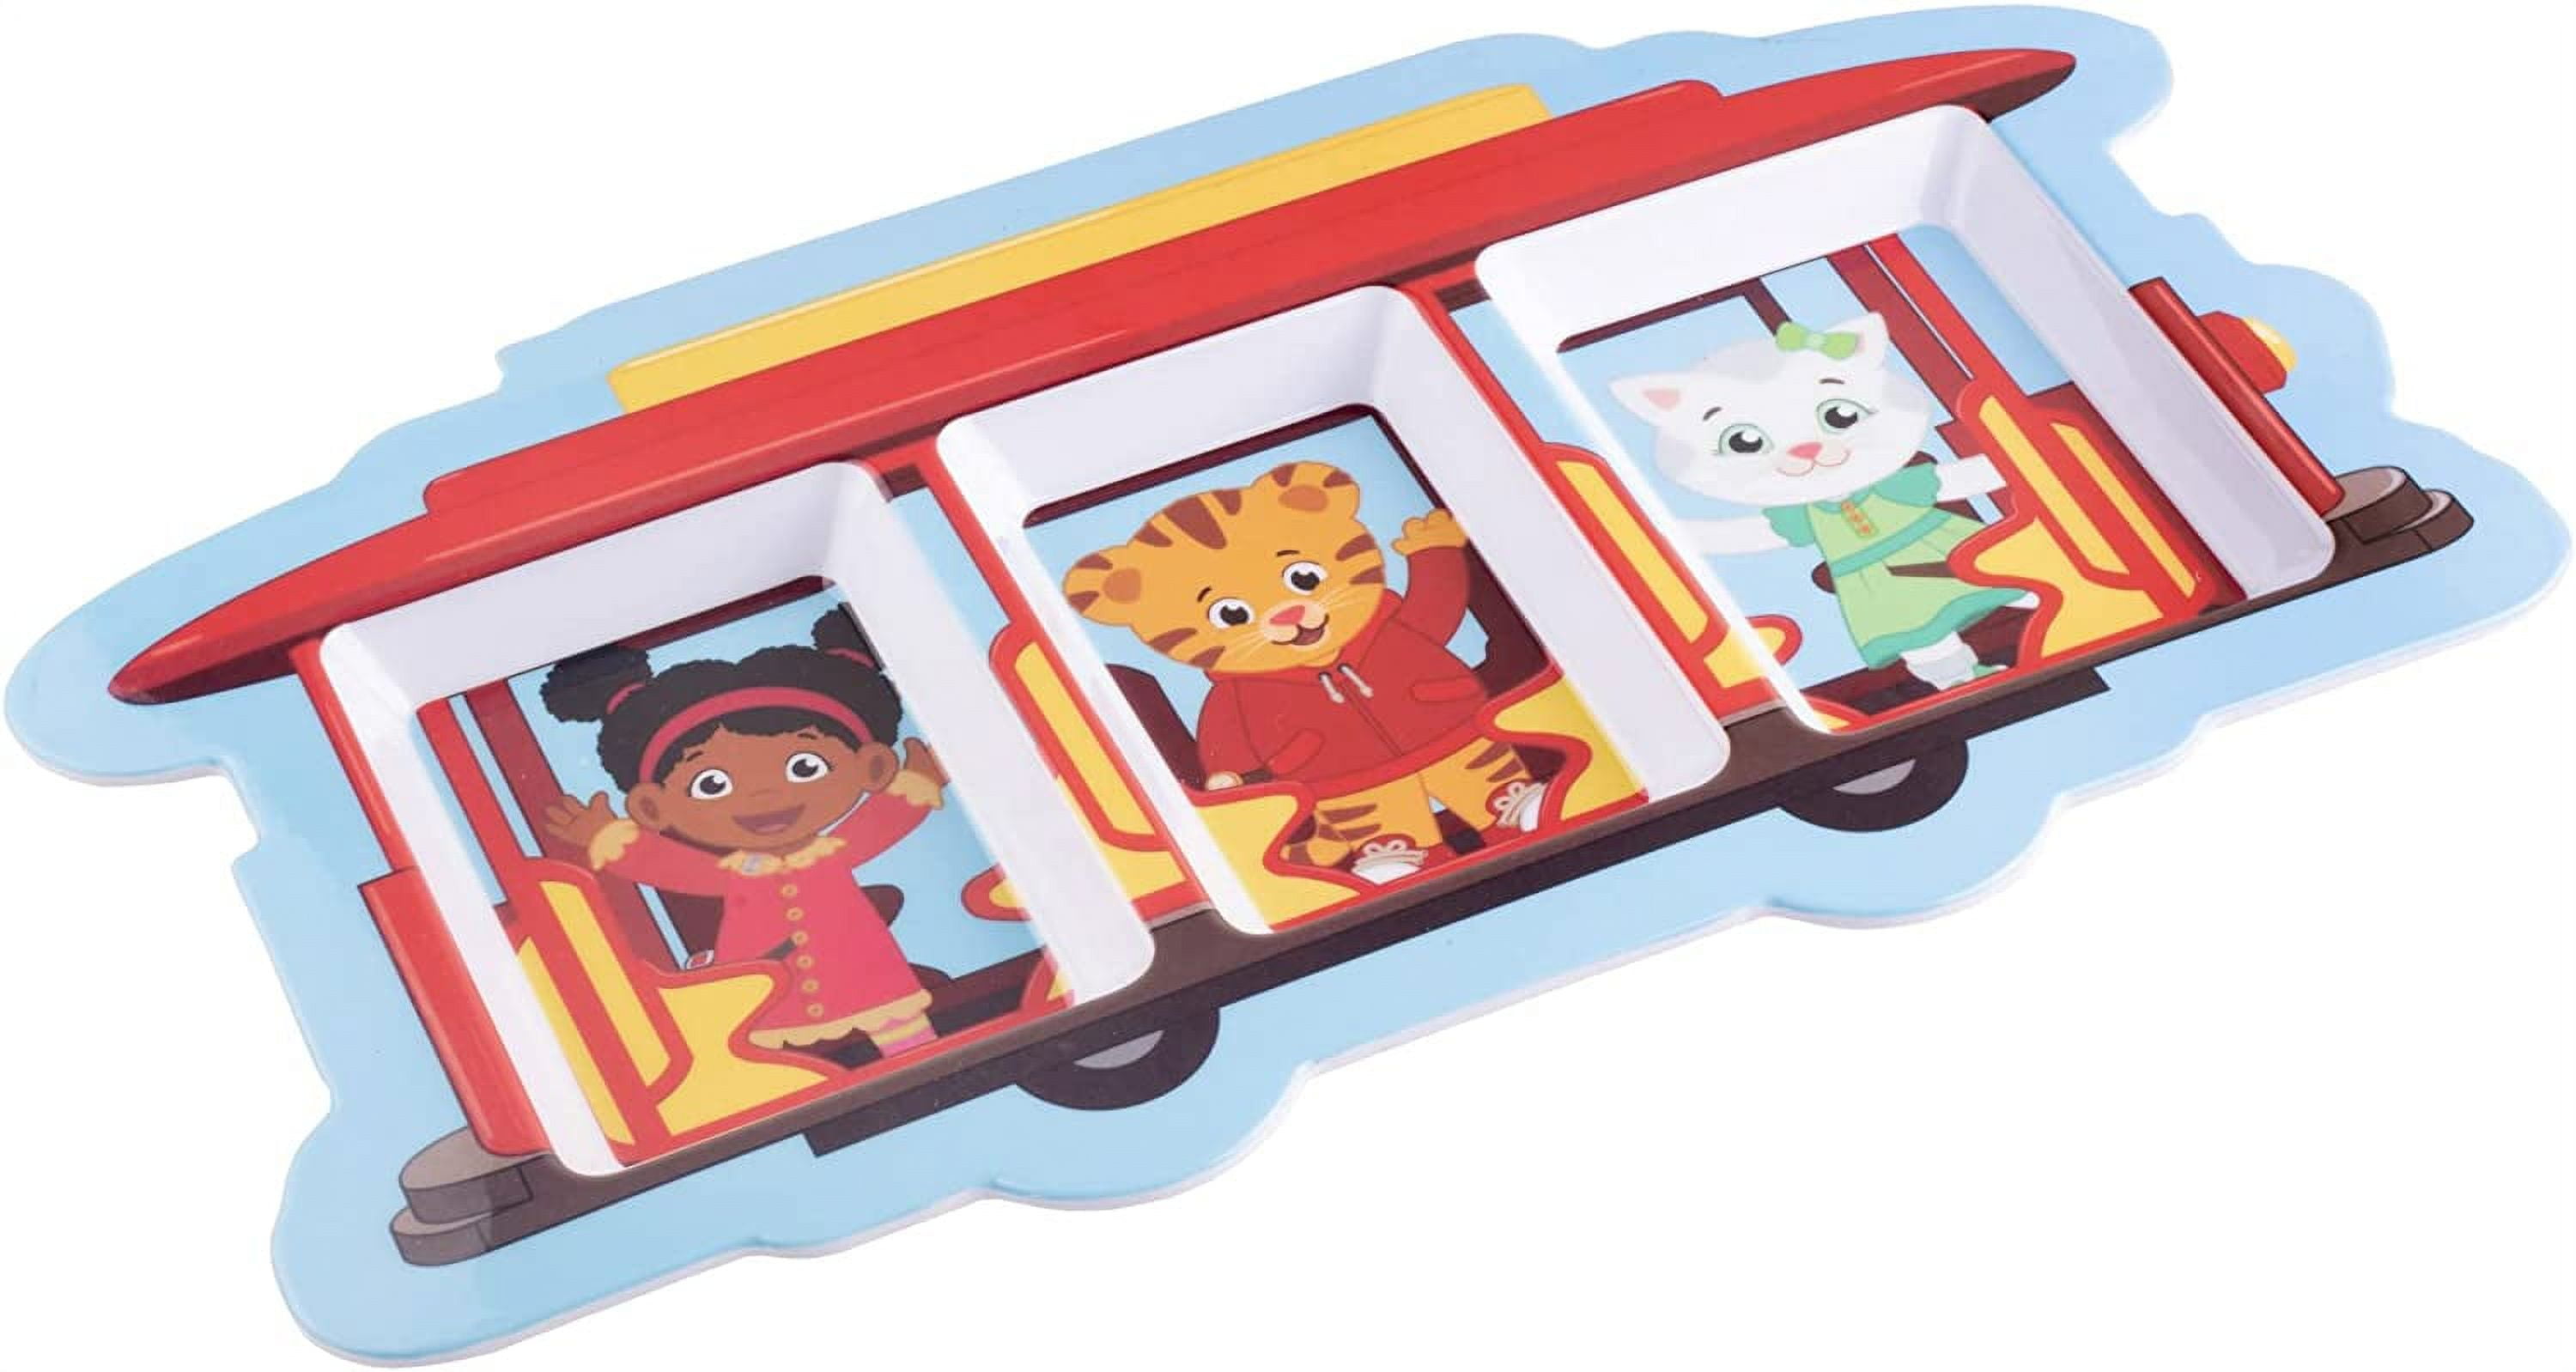 Daniel Tiger 5 PC Mealtime Feeding Set for Kids and Toddlers - Includes Plate, Bowl, Cup, Fork and Spoon Utensil Flatware - Durable, Dishwasher Safe